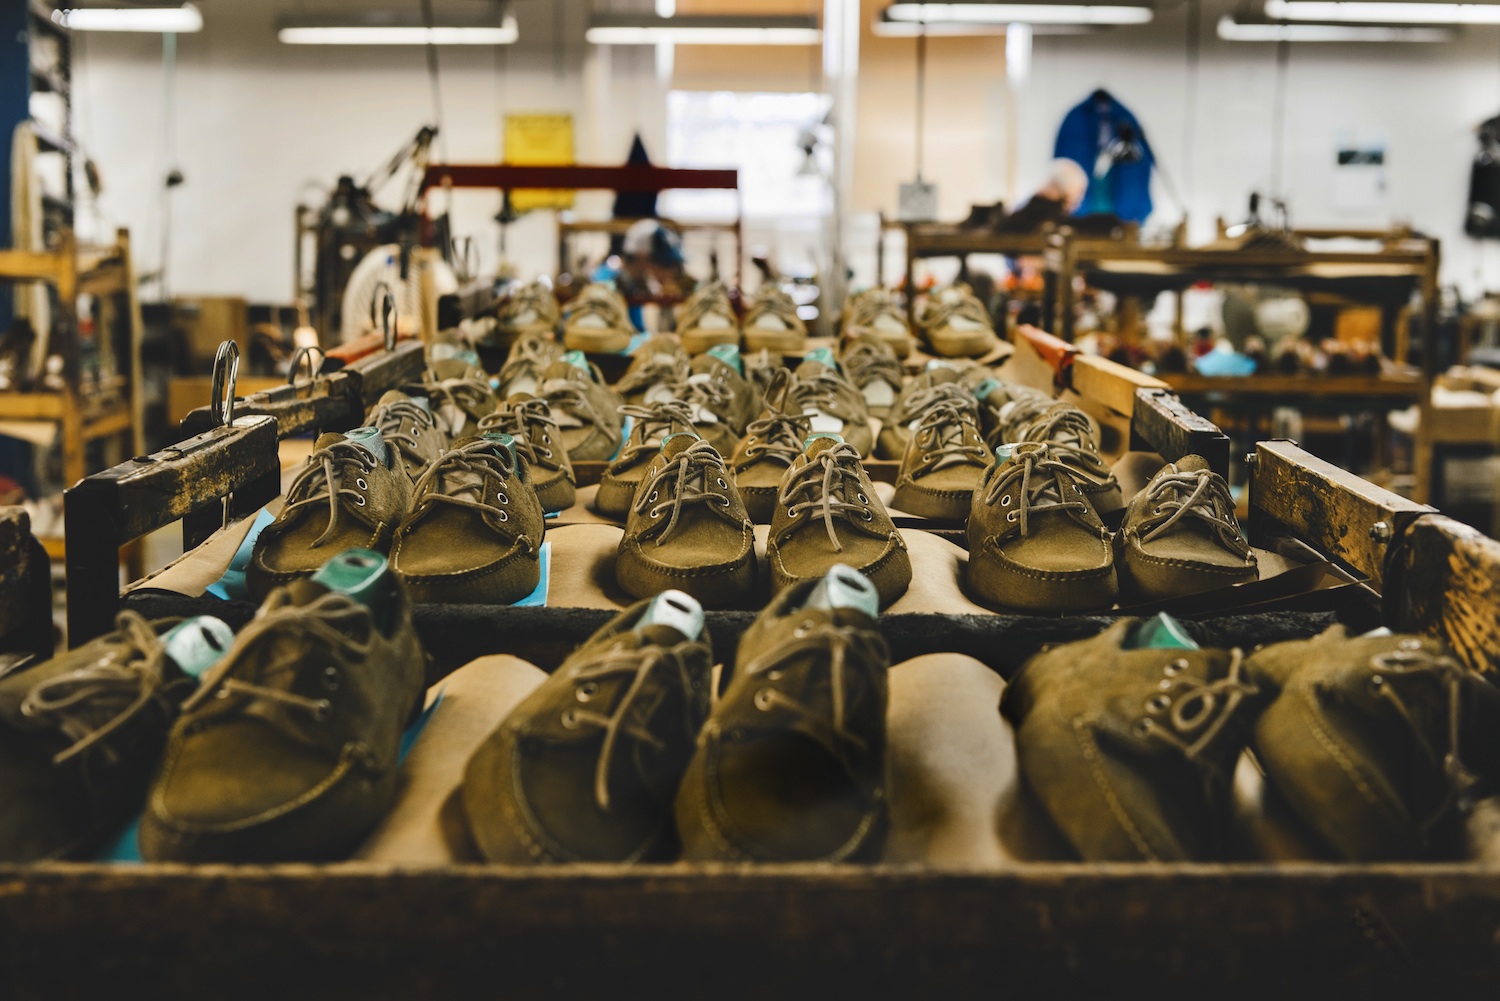 Rows of many pairs of Rancourt loafers.